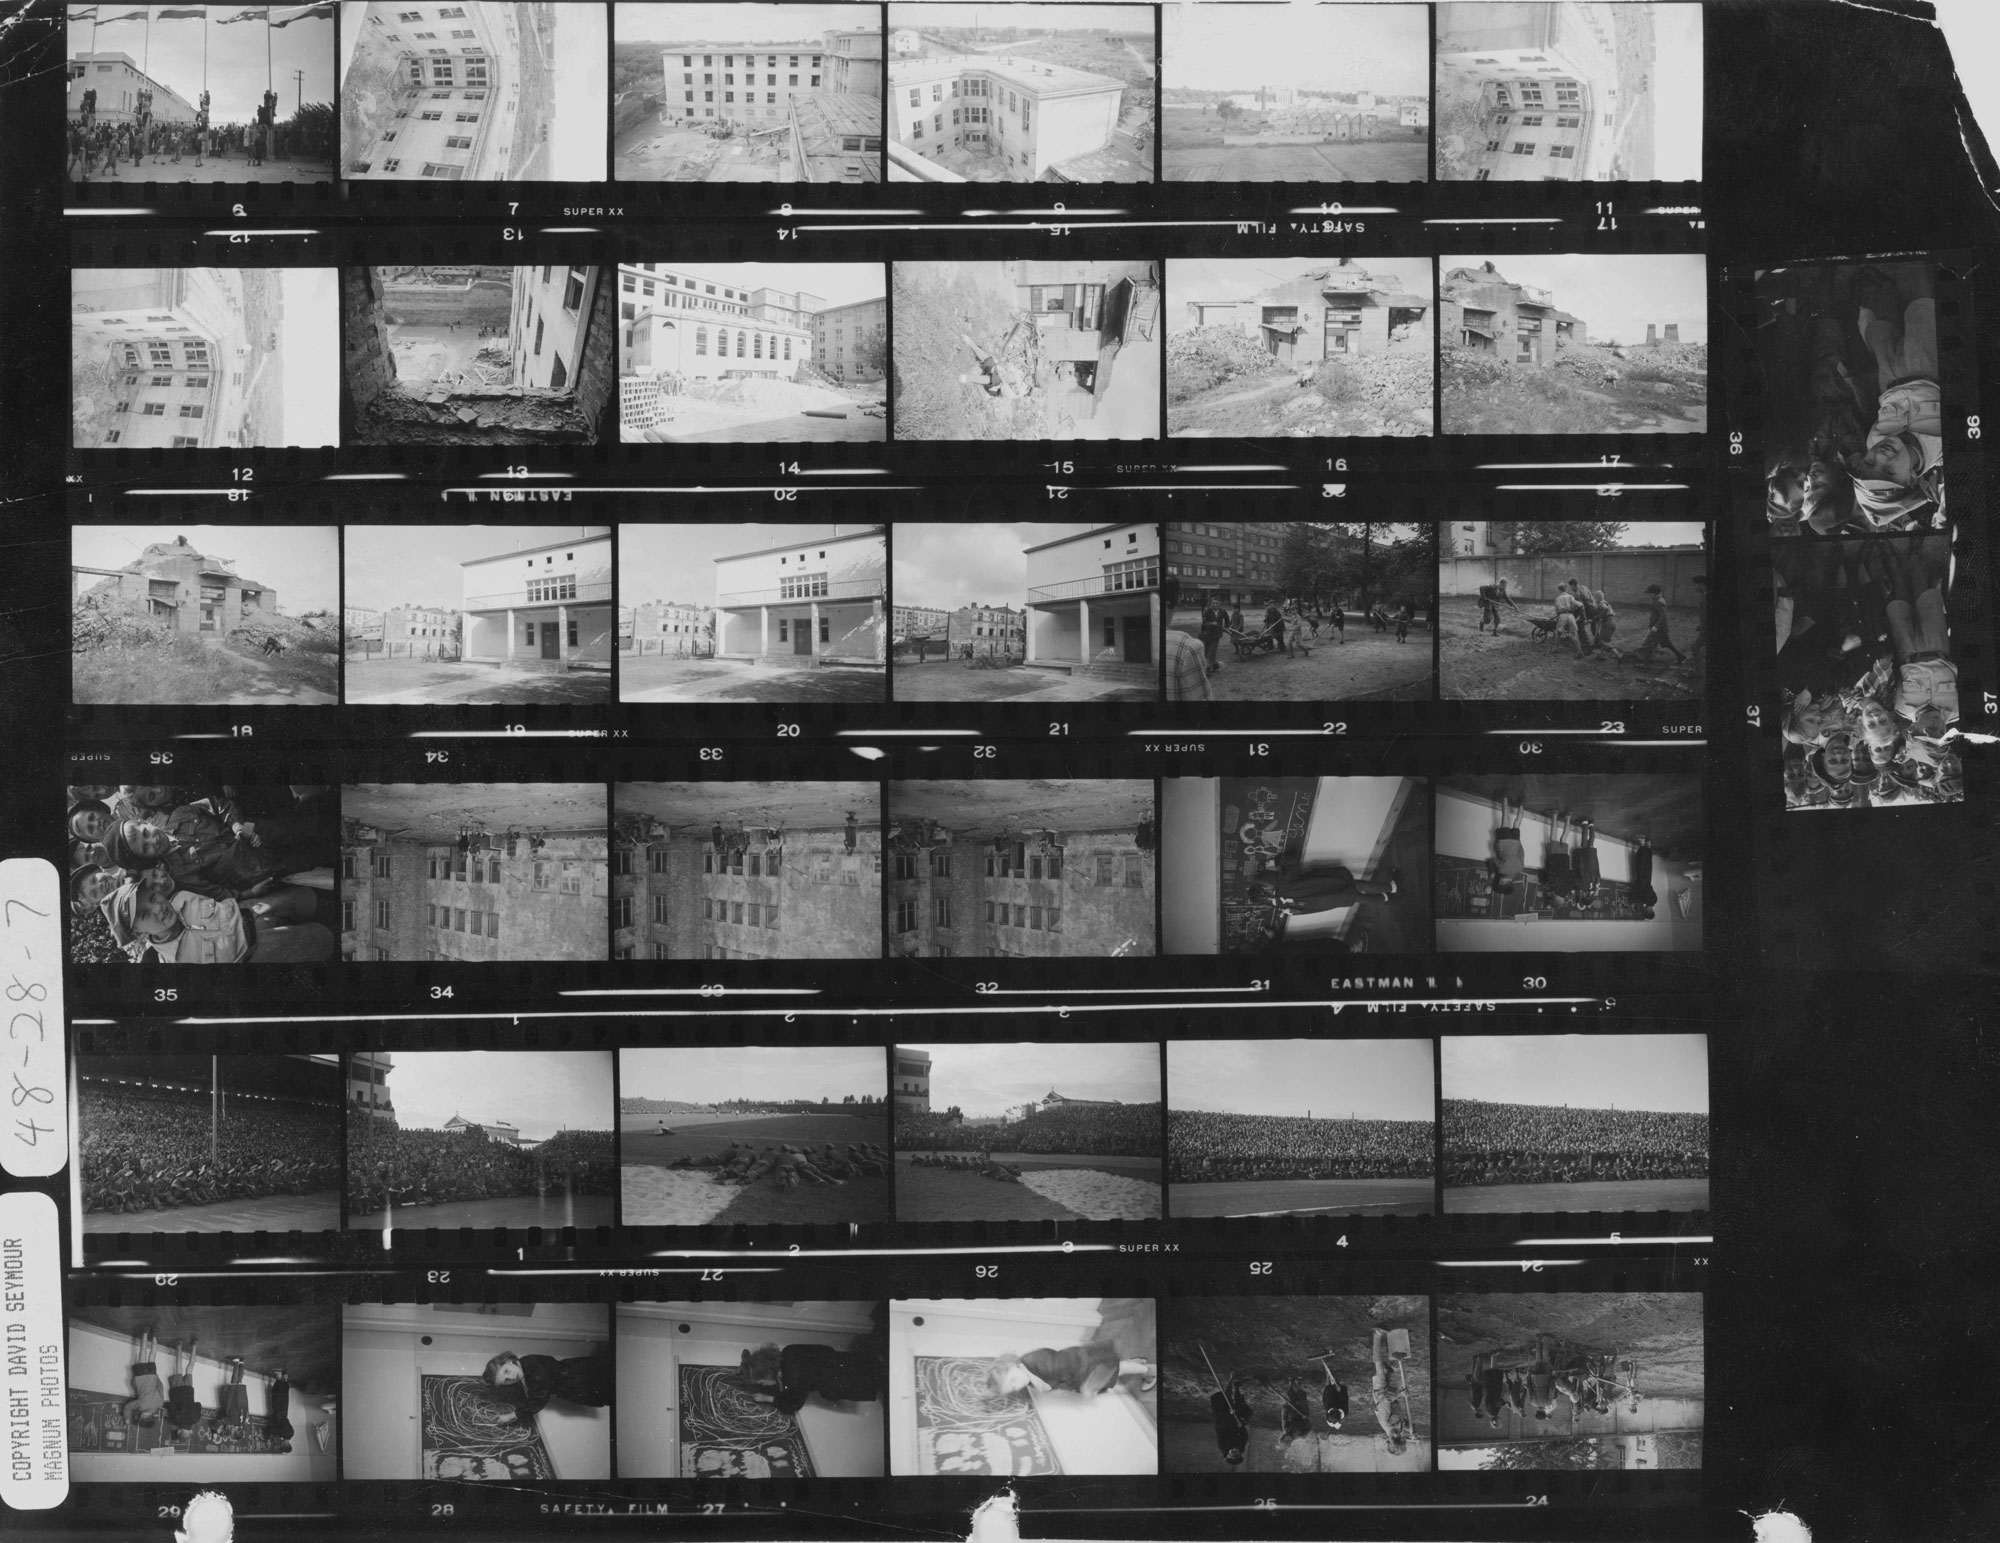 Contact sheet showing the school buildings in 1948. (David ‘Chim' Seymour—Magnum Photos)